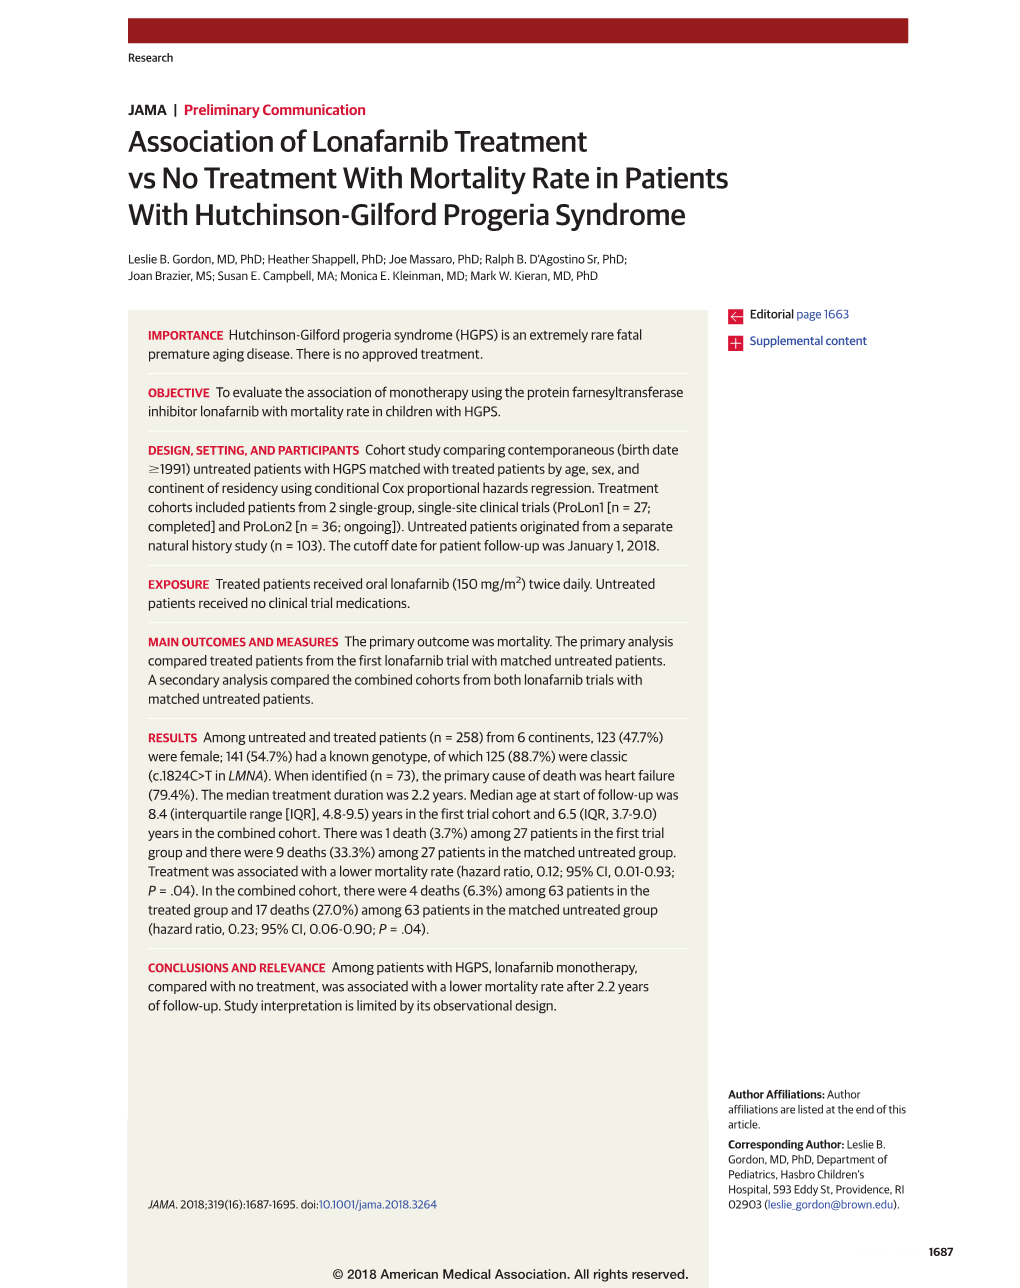 Association of Lonafarnib Treatment Vs No Treatment with Mortality Rate in Patients with Hutchinson-Gilford Progeria Syndrome